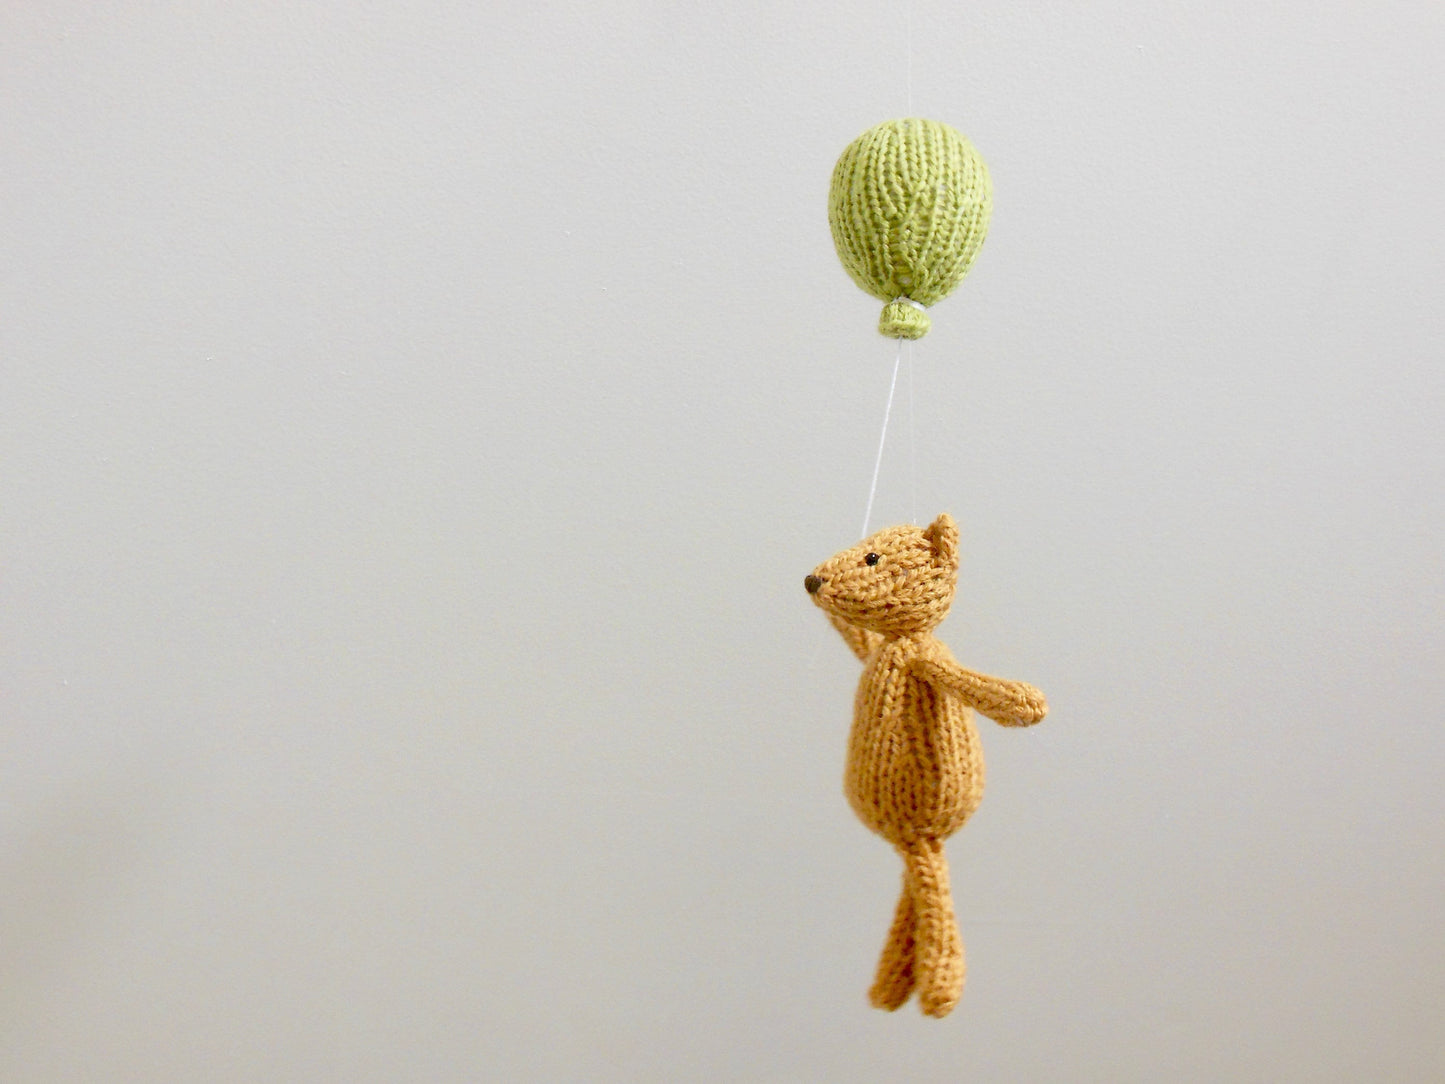 Toffee Bear Holding Balloon Mobile